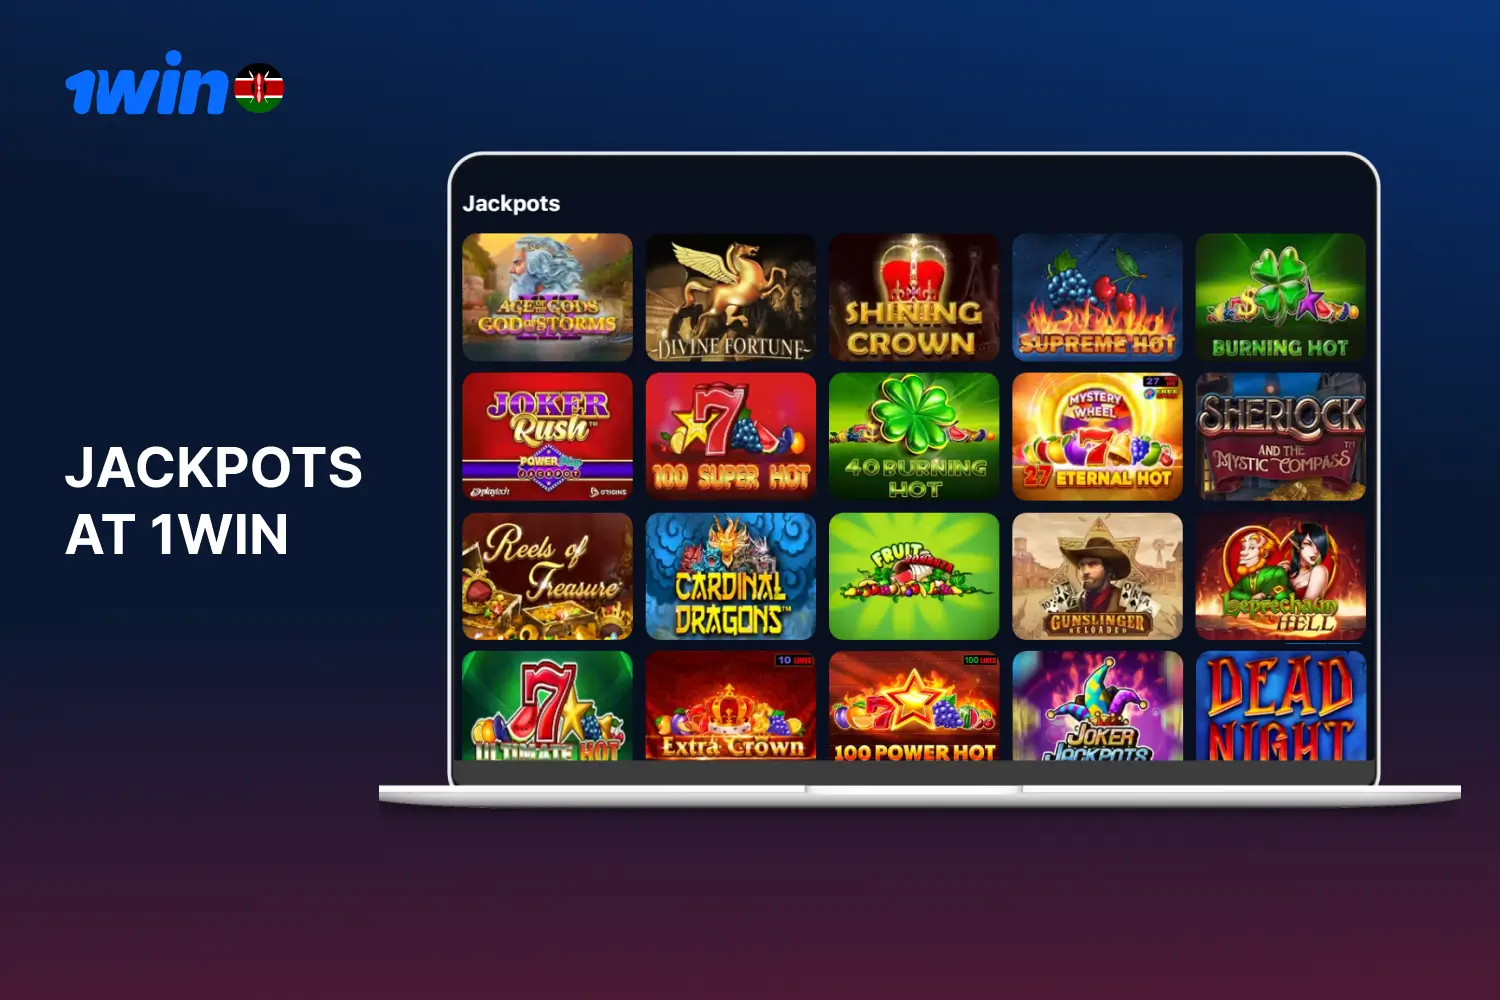 Gamblers from Kenya can try to hit the big jackpot more than 700 jackpot games at 1win casino